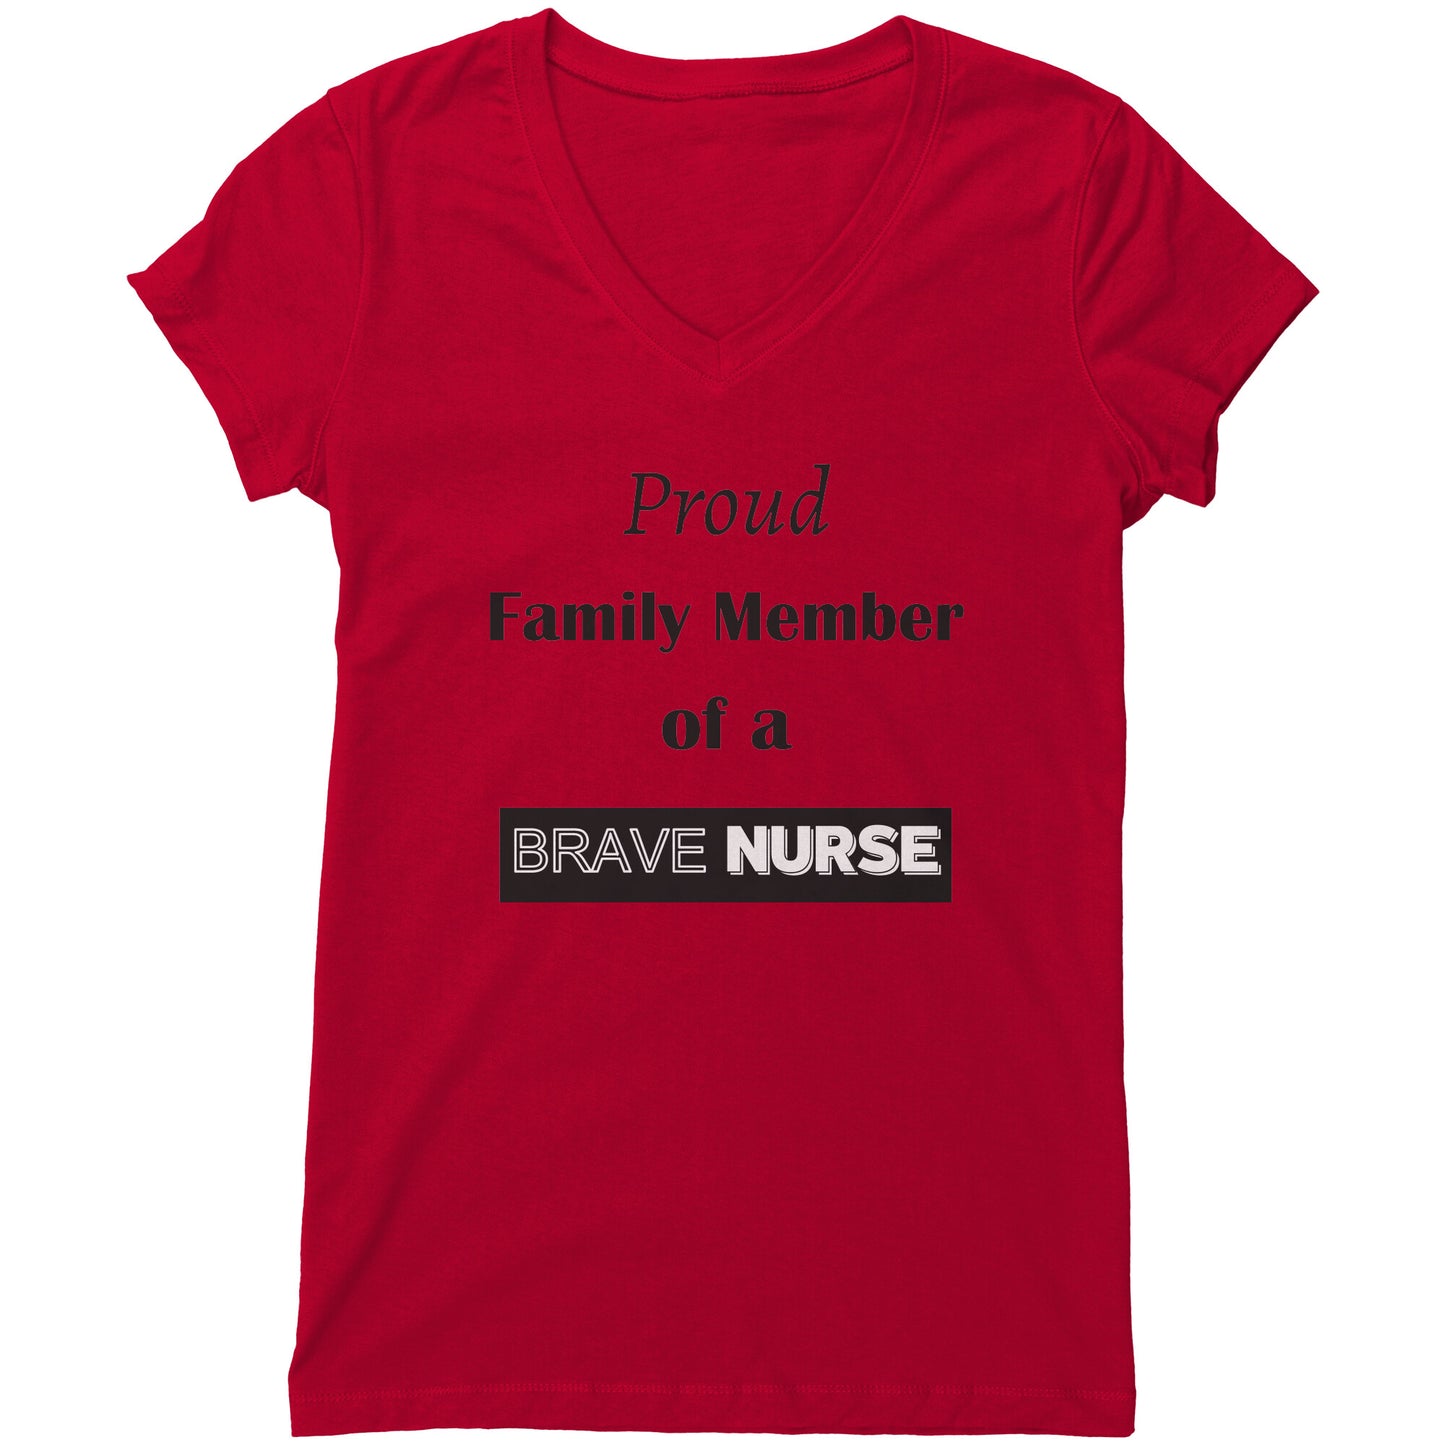 Proud Family Member of a Brave Nurse Lettering Womens Shirt - Signs and Seasons Gifts